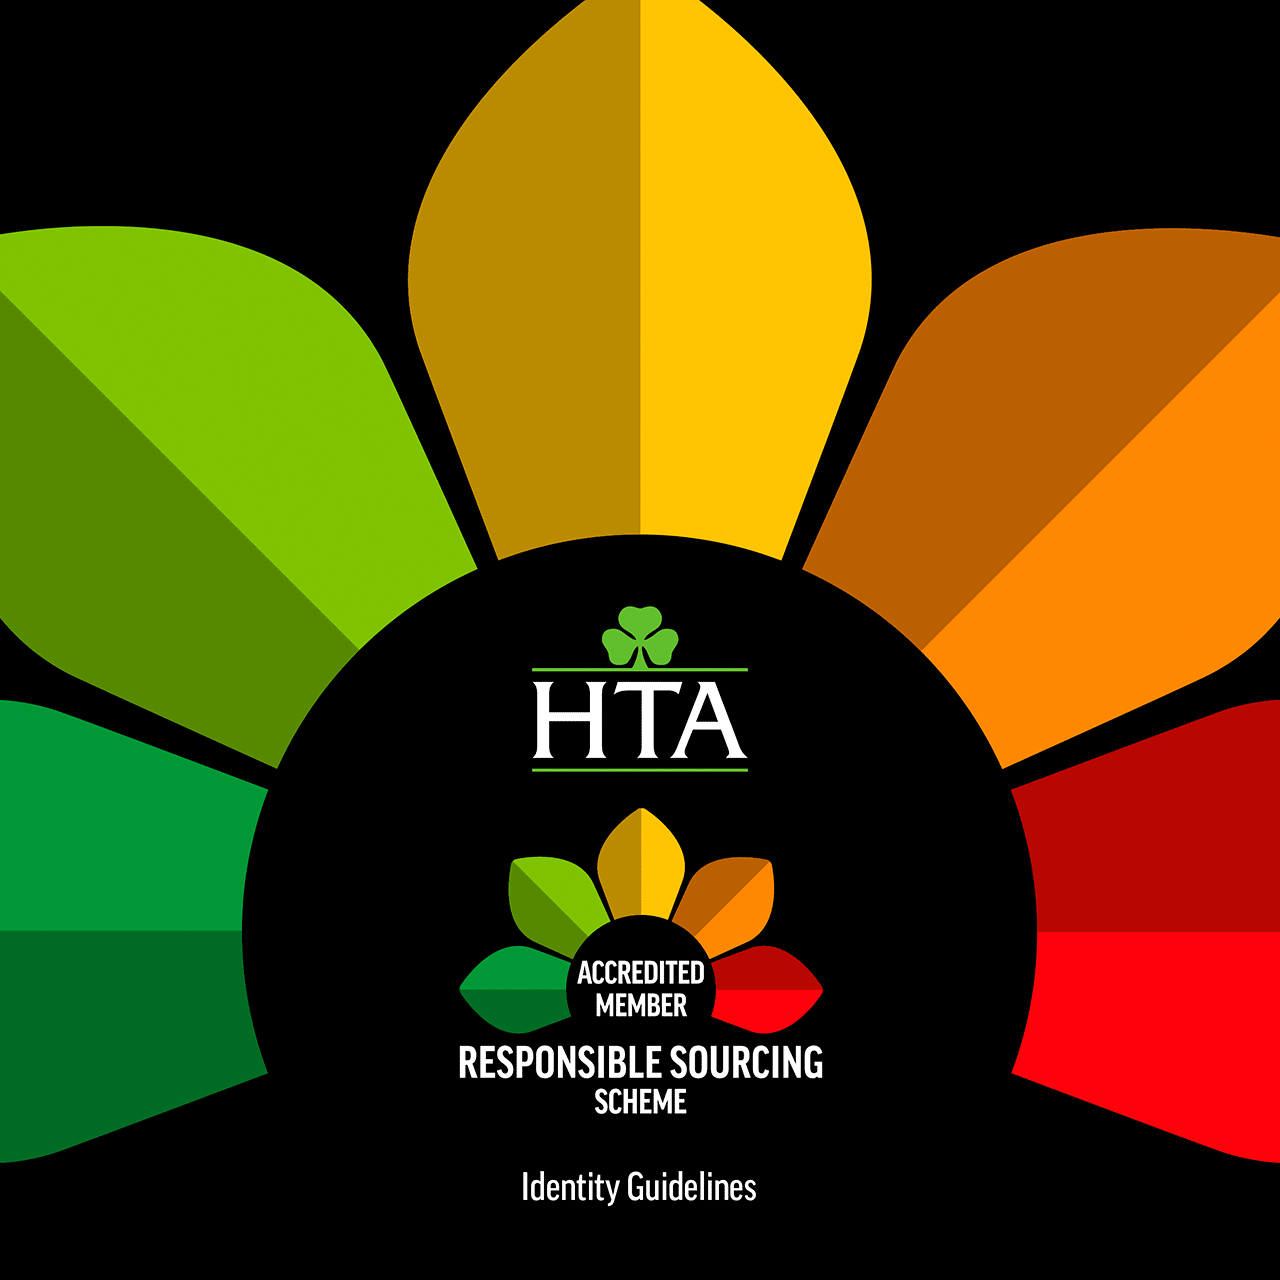 HTA Responsible Sourcing Identity Guidelines